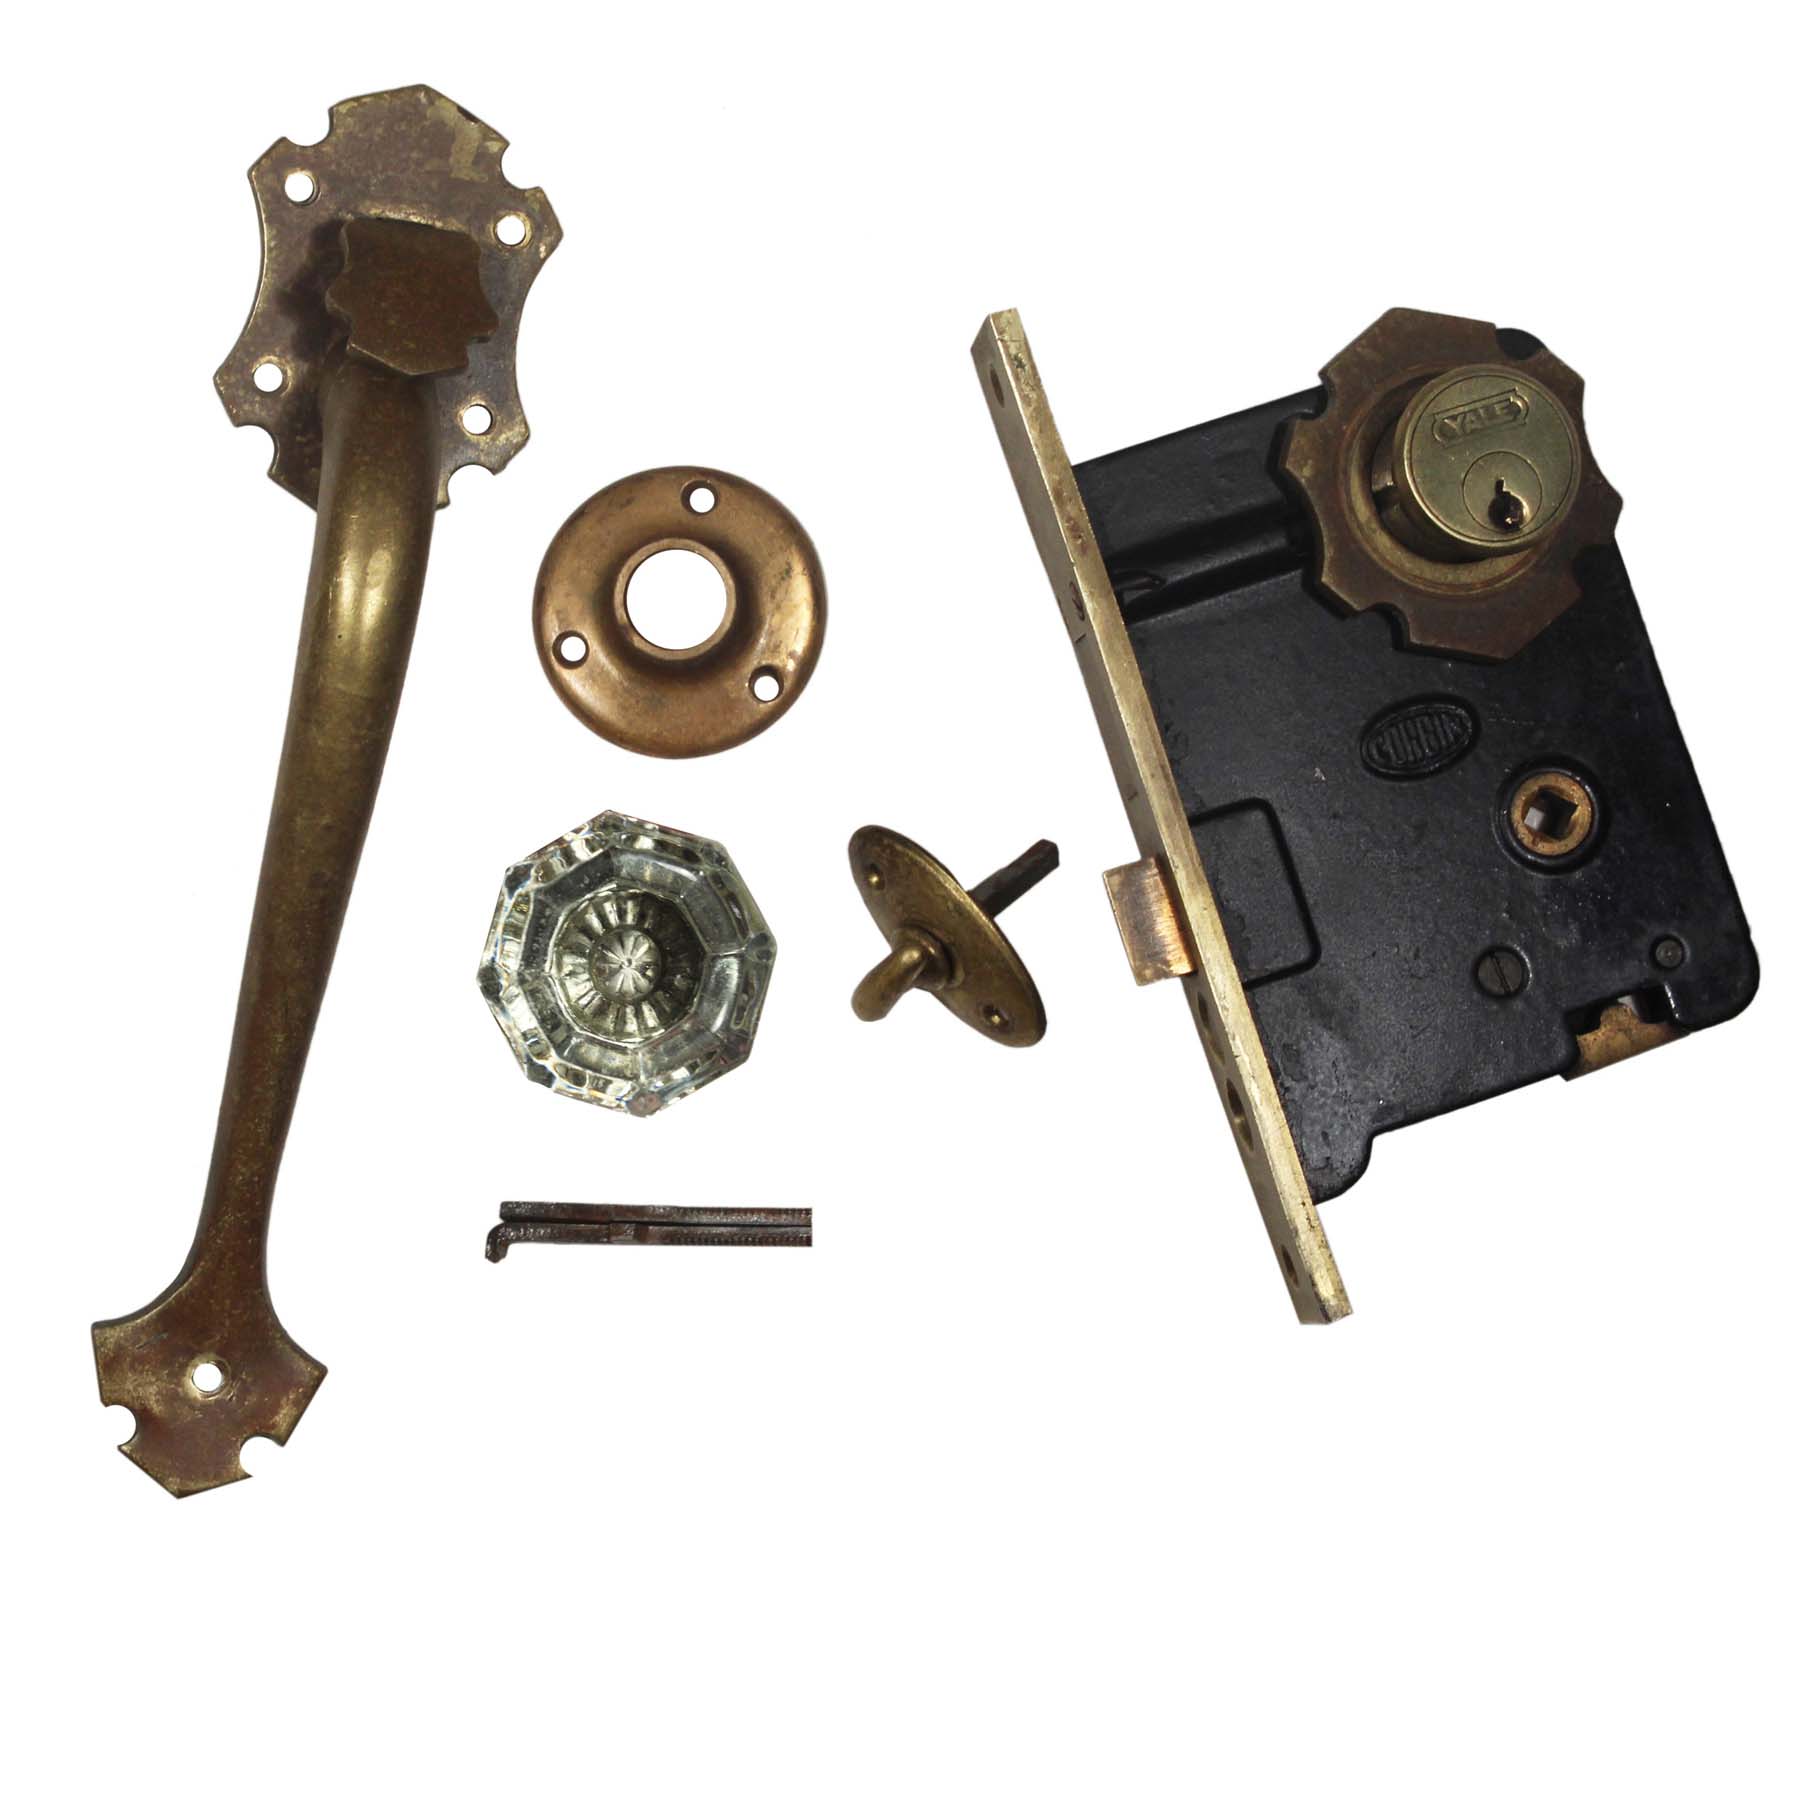 SOLD Complete Antique Bronze Exterior Lock Set with Thumb Latch by Corbin-0